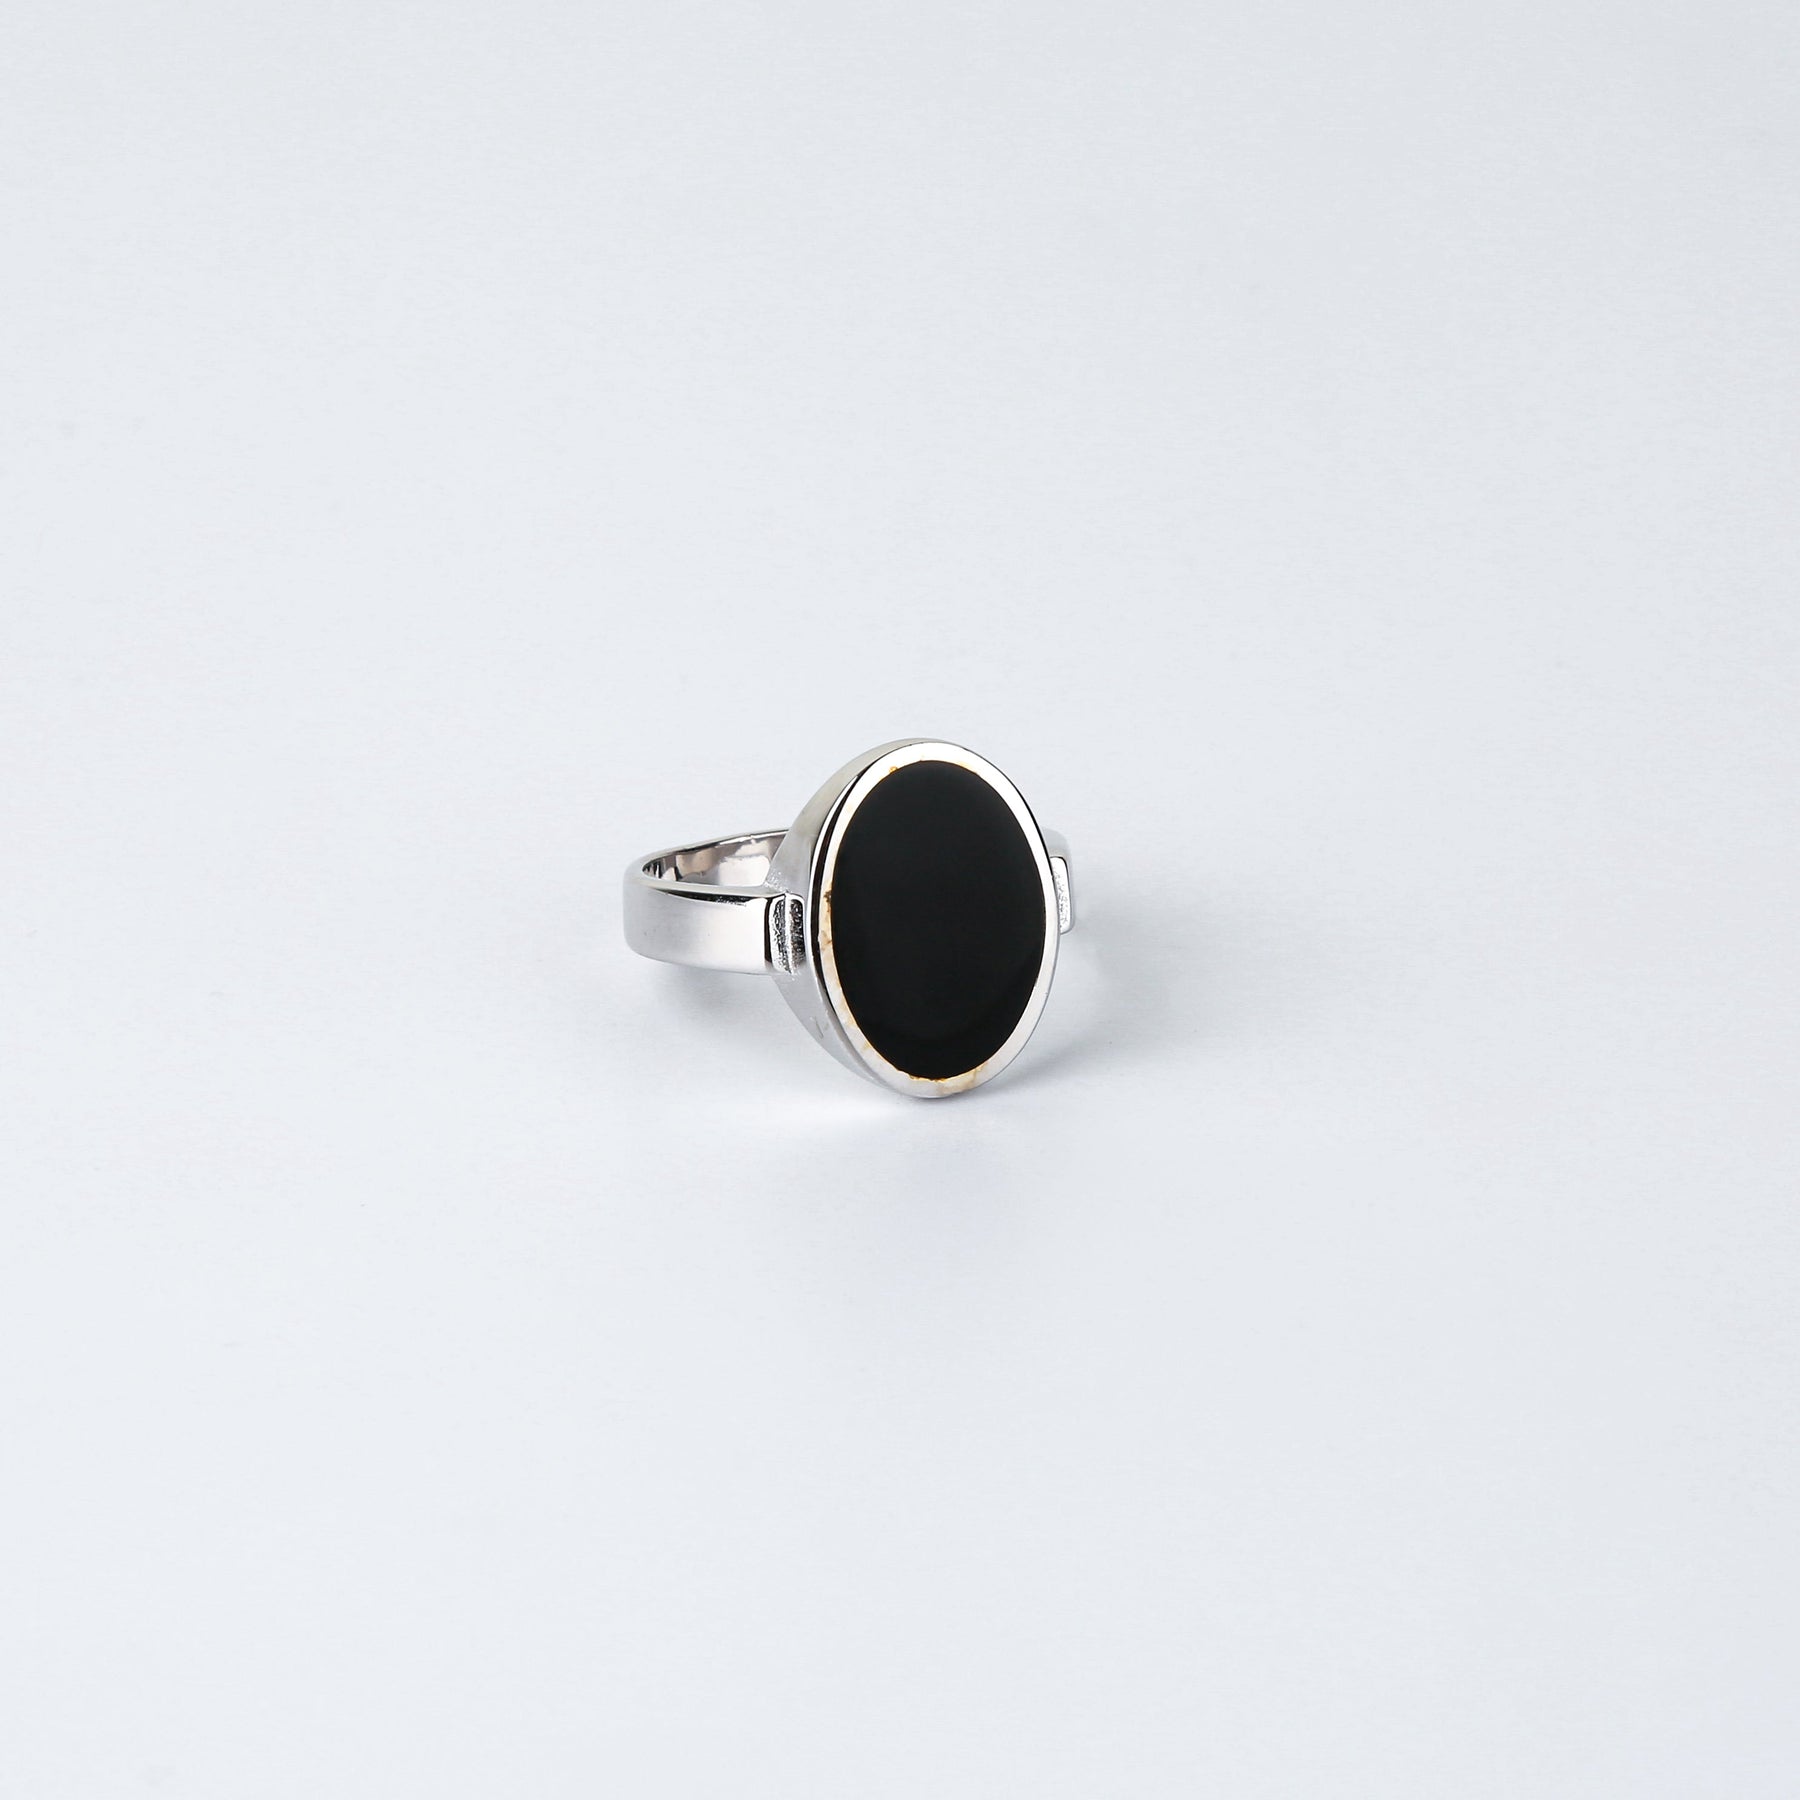 The Classic Oval Black Finish Ring